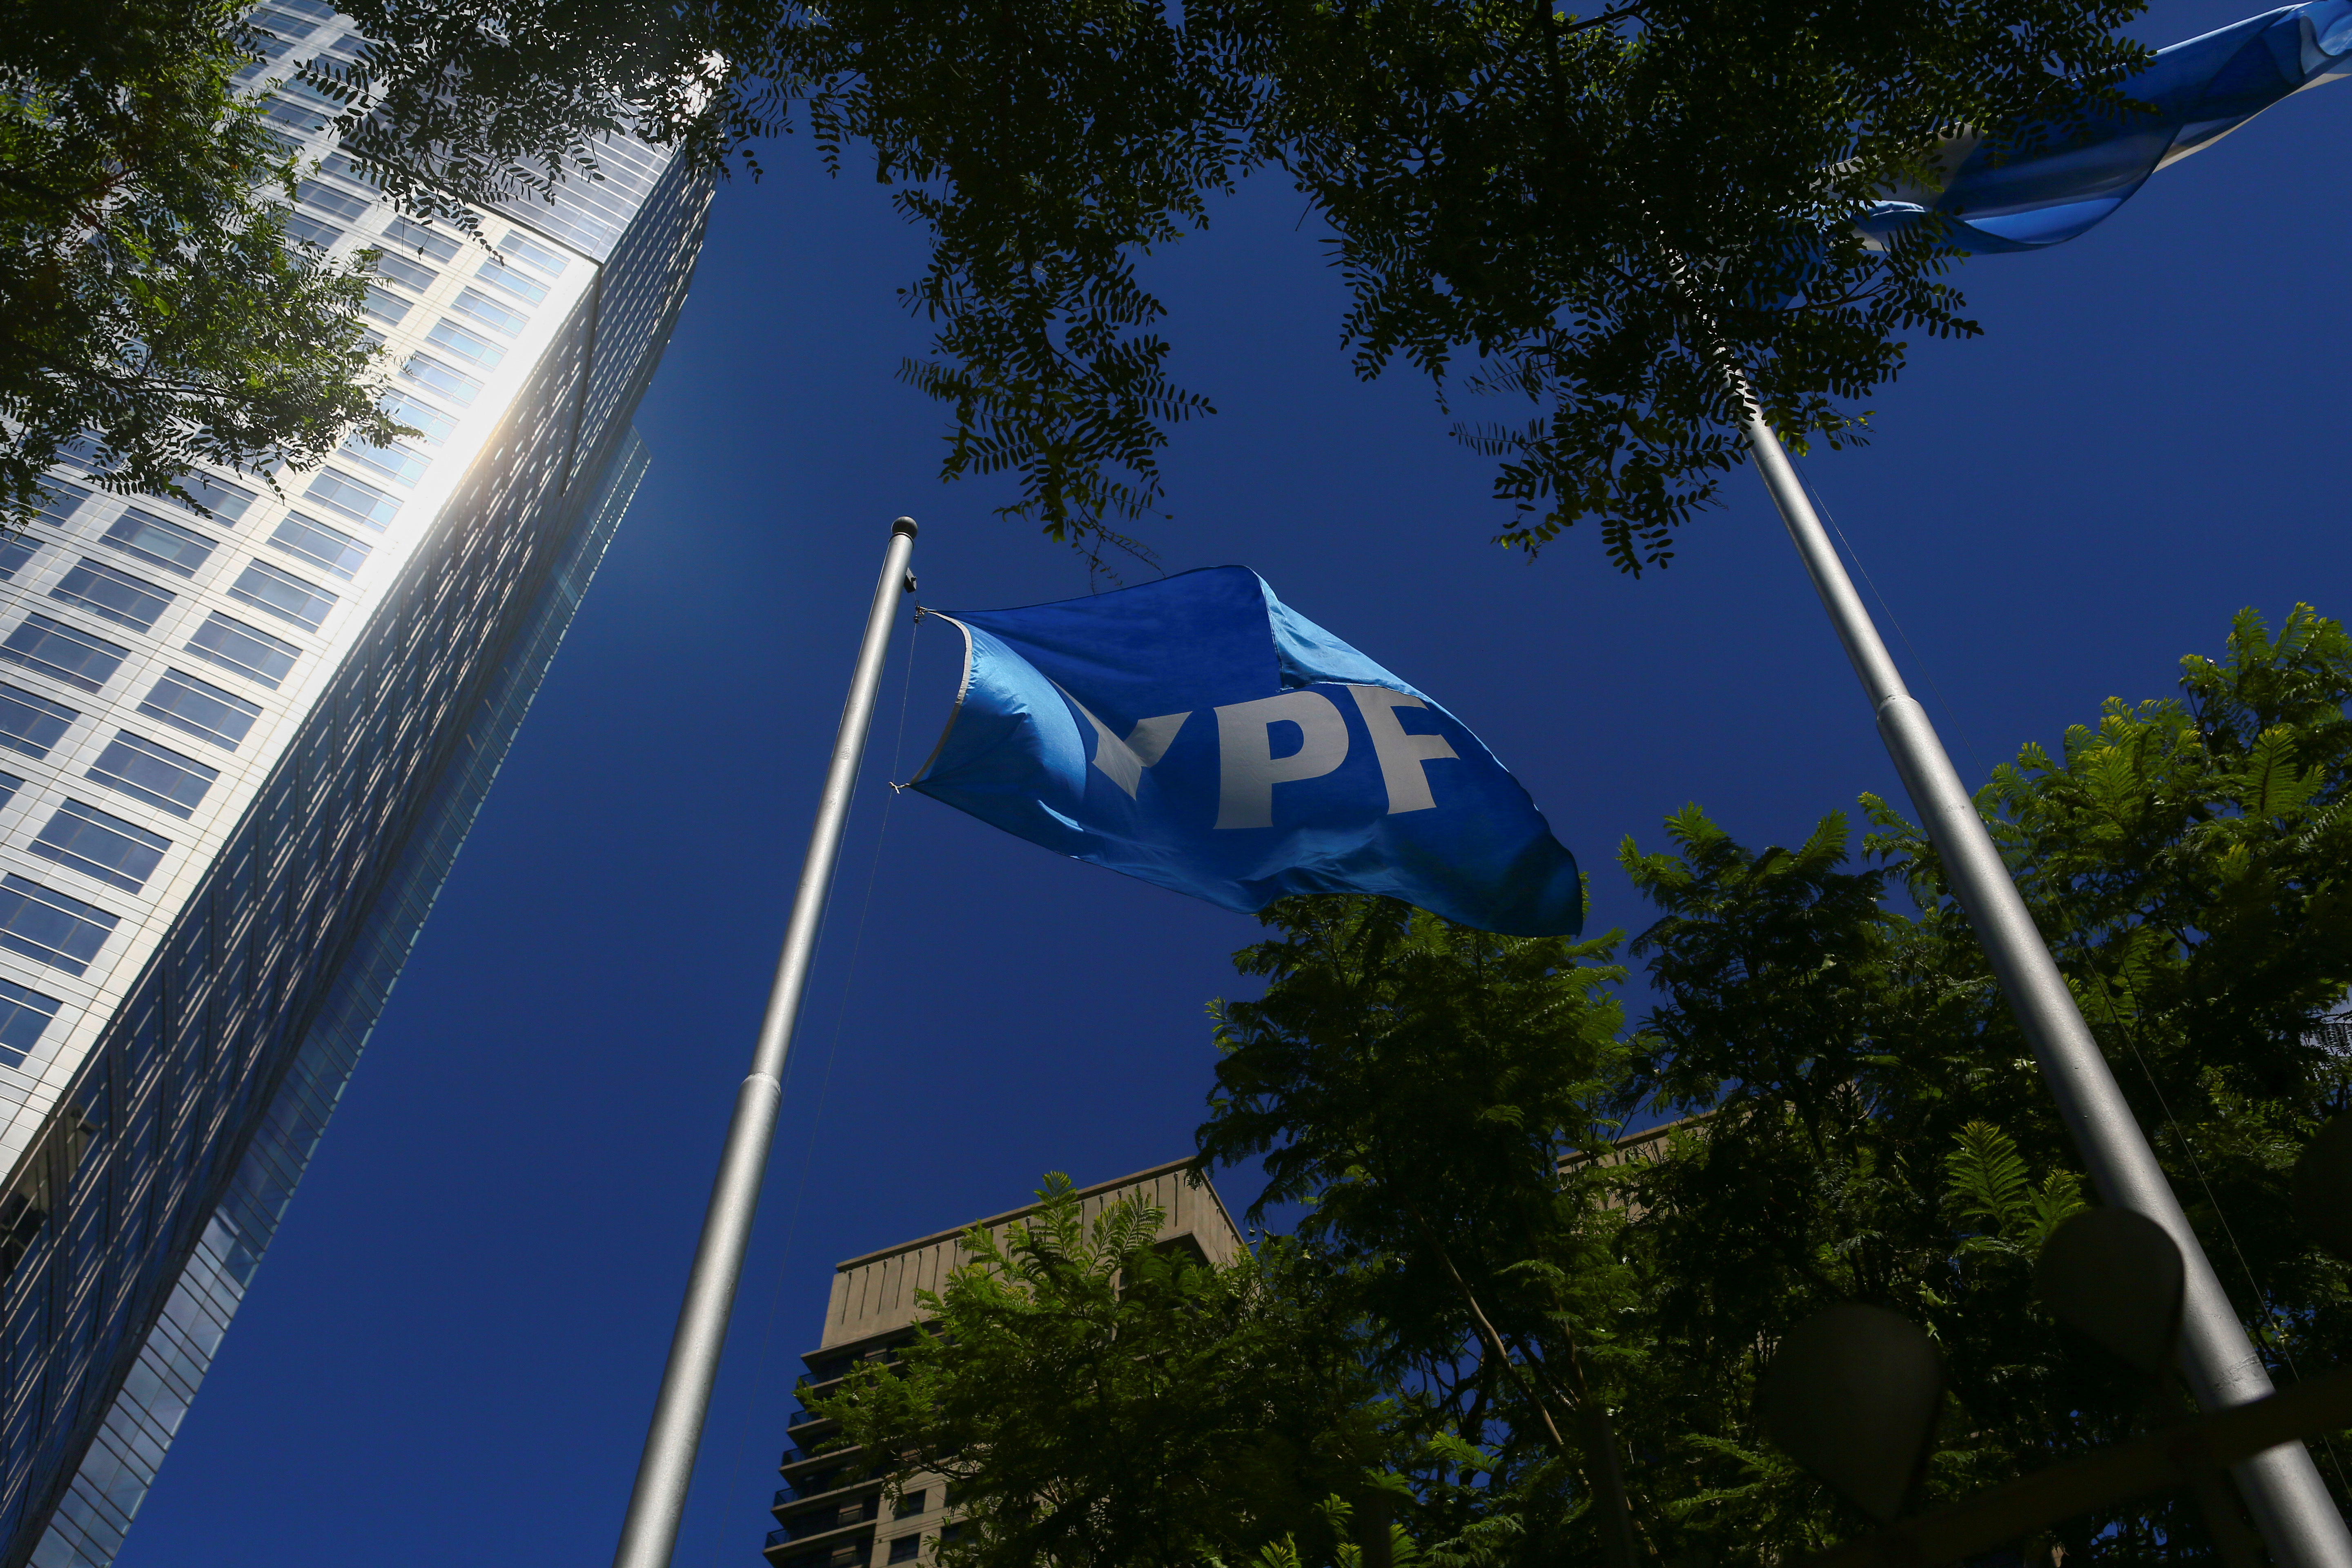 The headquarters of Argentina's state energy company YPF is seen in Buenos Aires